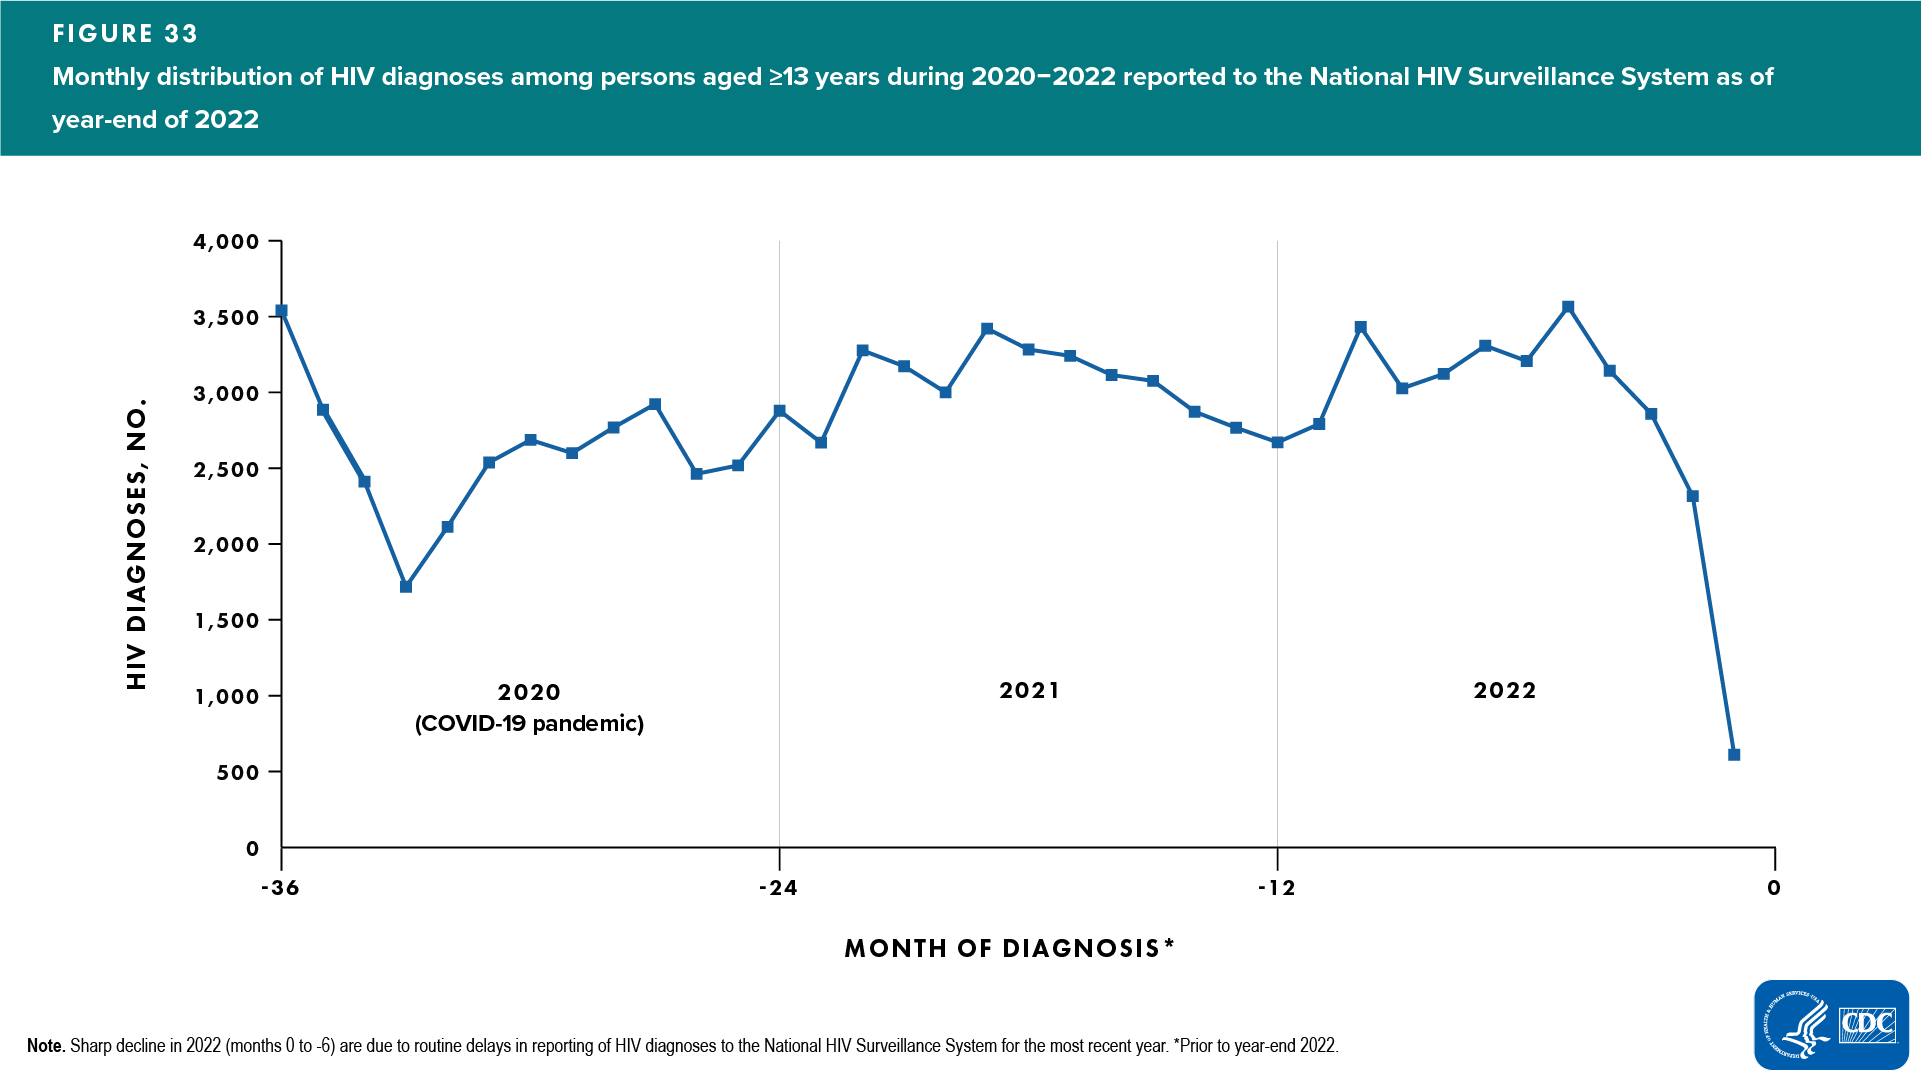 Figure 33. Monthly distribution of HIV diagnoses among persons aged ≥13 years during 2020–2022 reported to the National HIV Surveillance System as of year-end of 2022